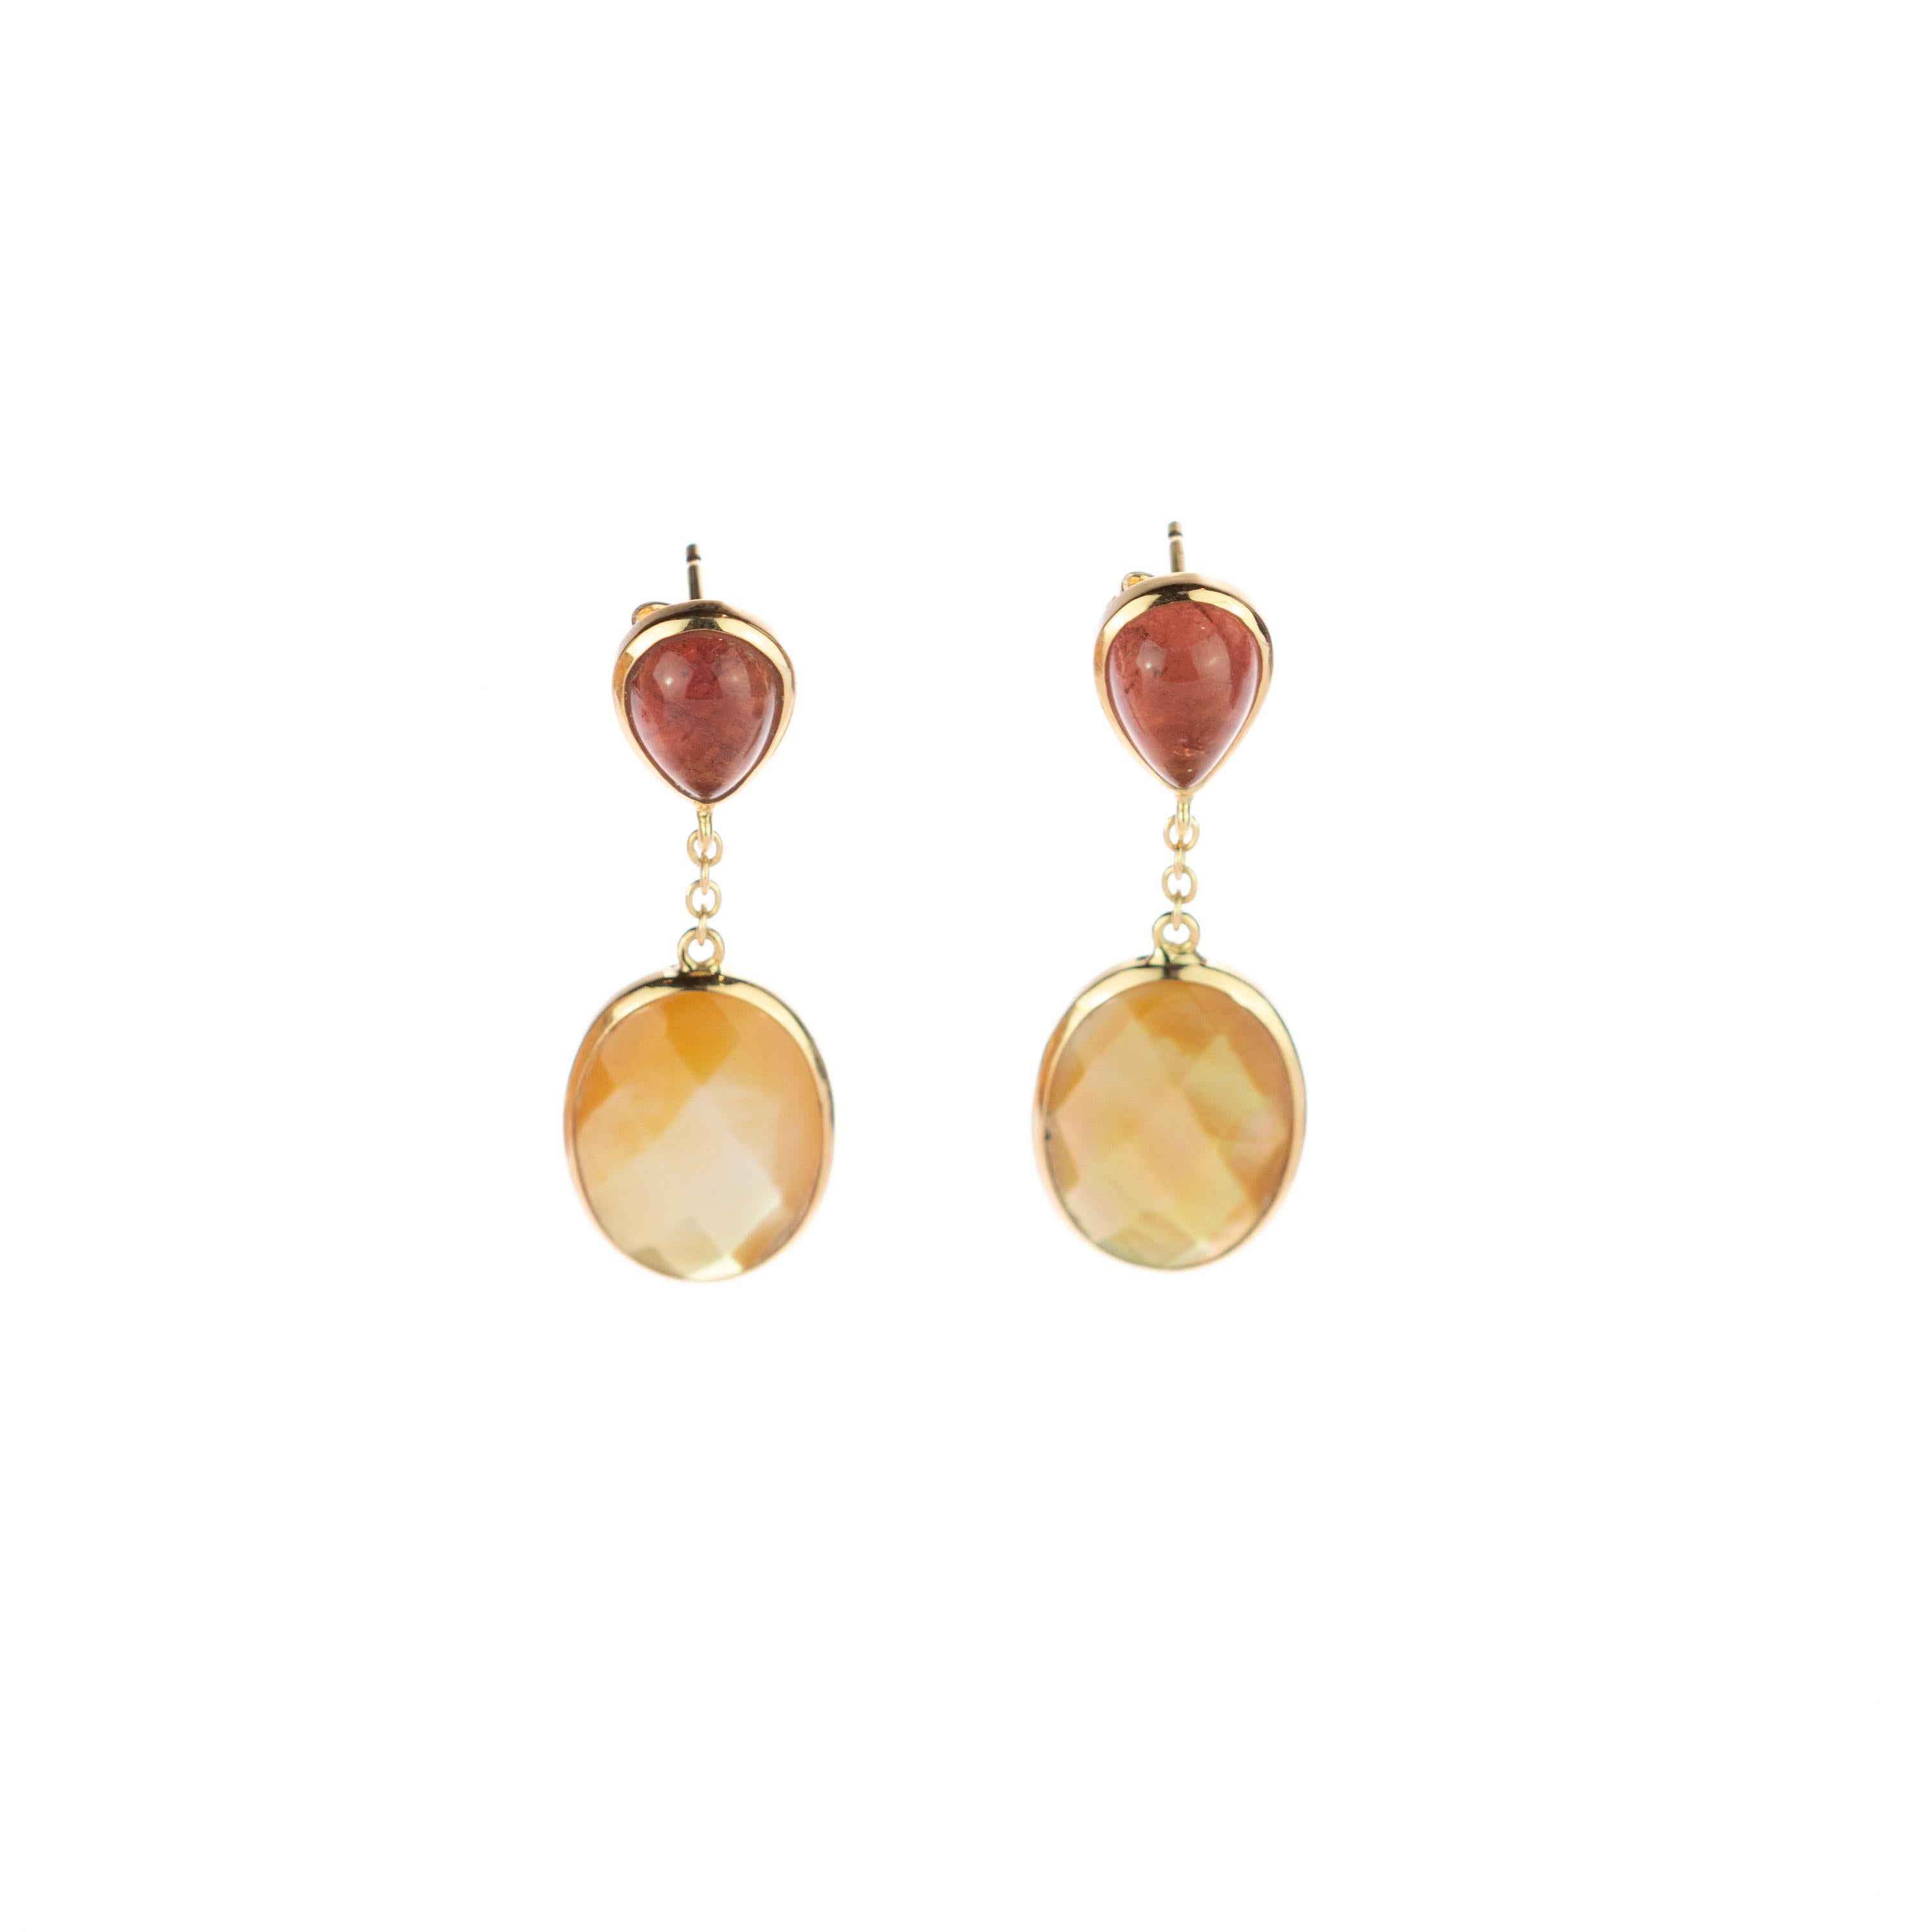 Glorious and impressive 12 carats mother of pearl and 6 carats tourmaline pineapple drop stud earring. Masterfully created by italians hands from 18 karat yellow gold. Each earring features a stunning oval 3D-shaped natural pearly pulish stone and a